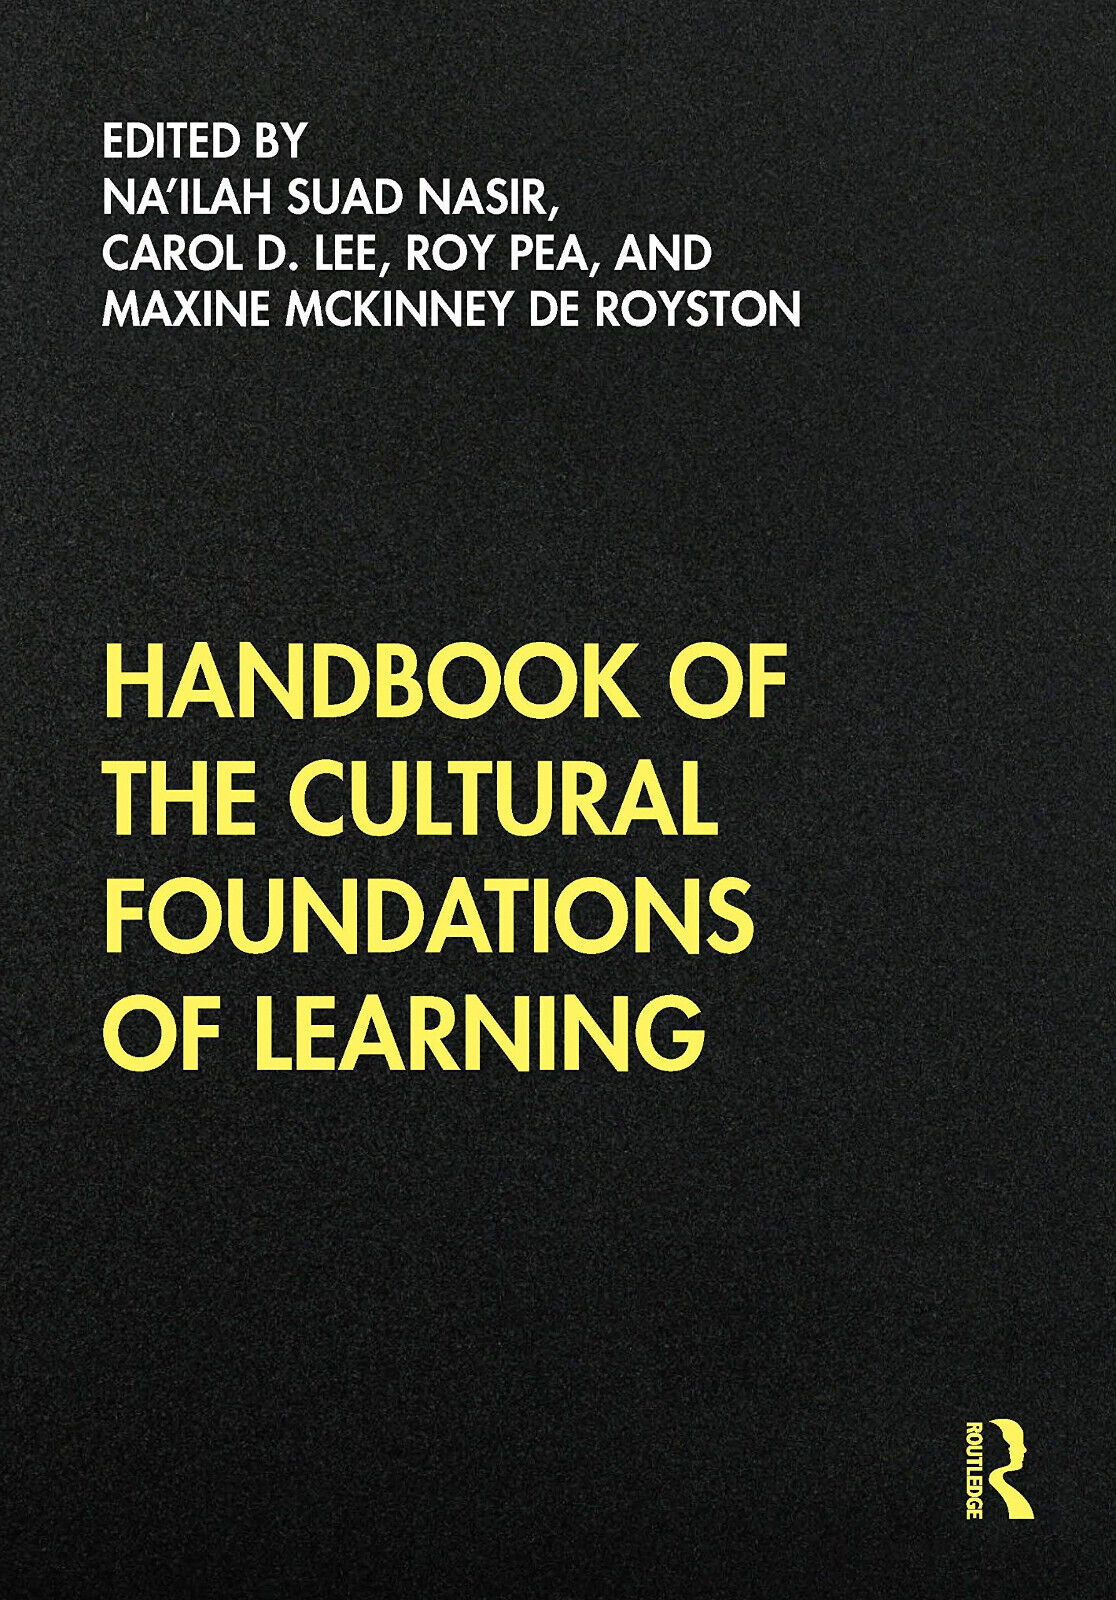 Handbook Of The Cultural Foundations Of Learning - Na'ilah Suad Nasir -2020 libro usato